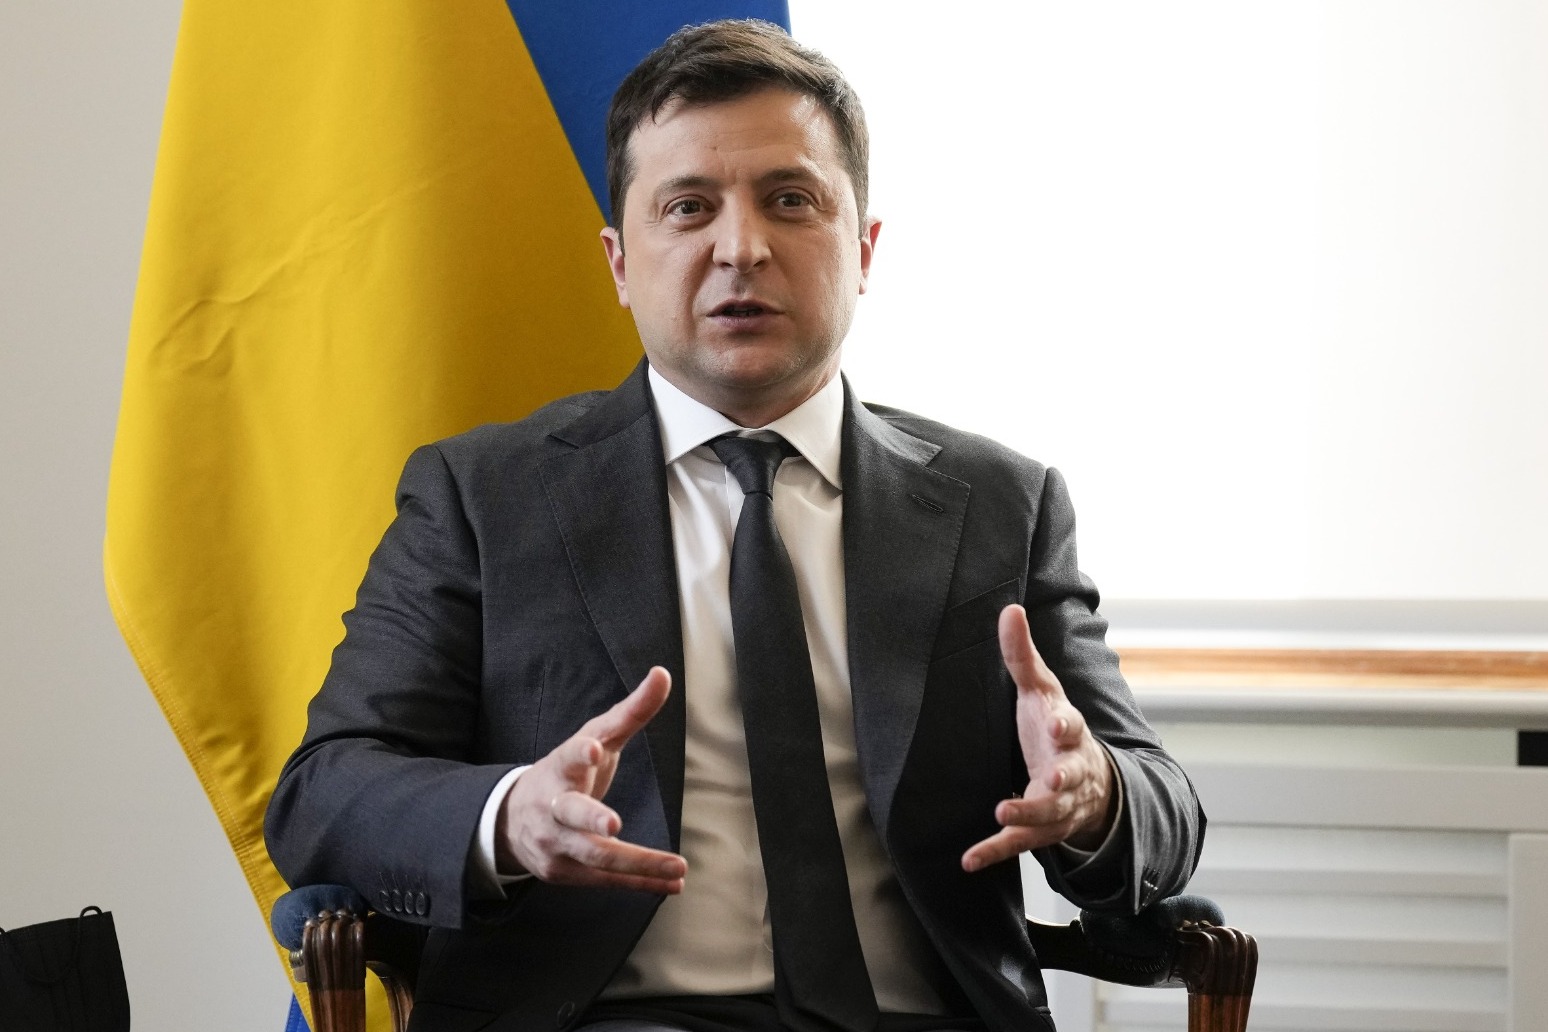 ‘This is the night they will storm’, Ukrainian president warns world from bunker 